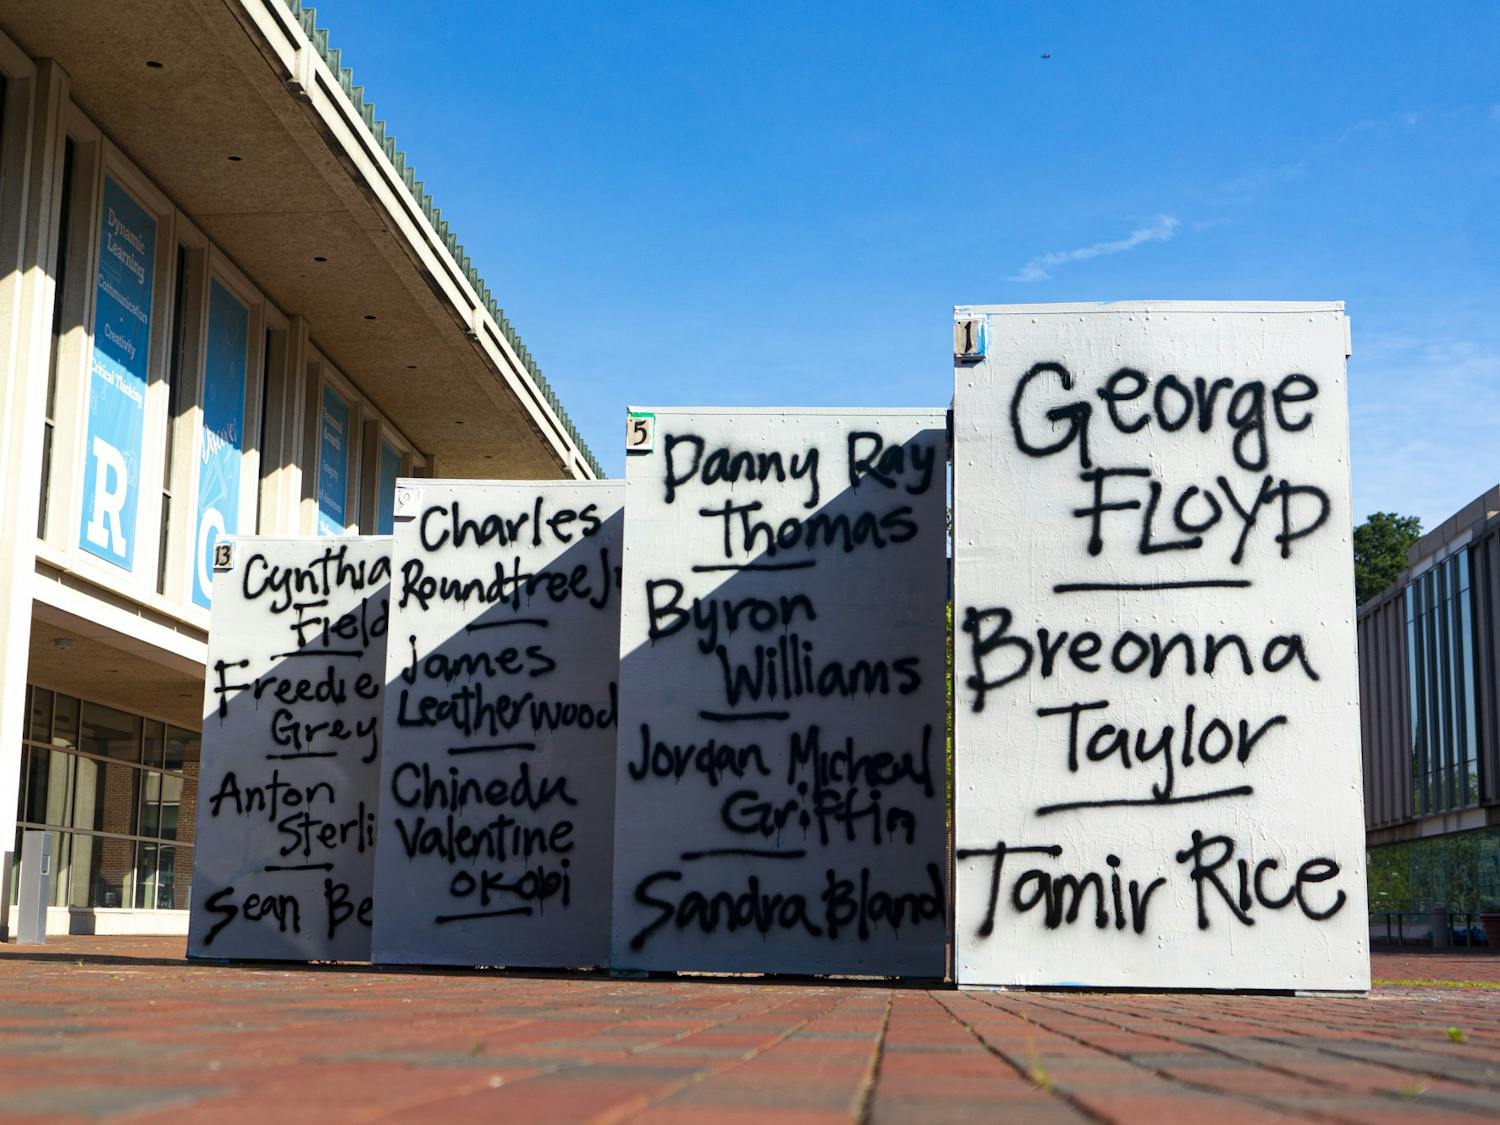 As of Sunday, June 7, 2020, the free expression blocks outside of the FPG Student Union were painted with the names of Black victims of police brutality.